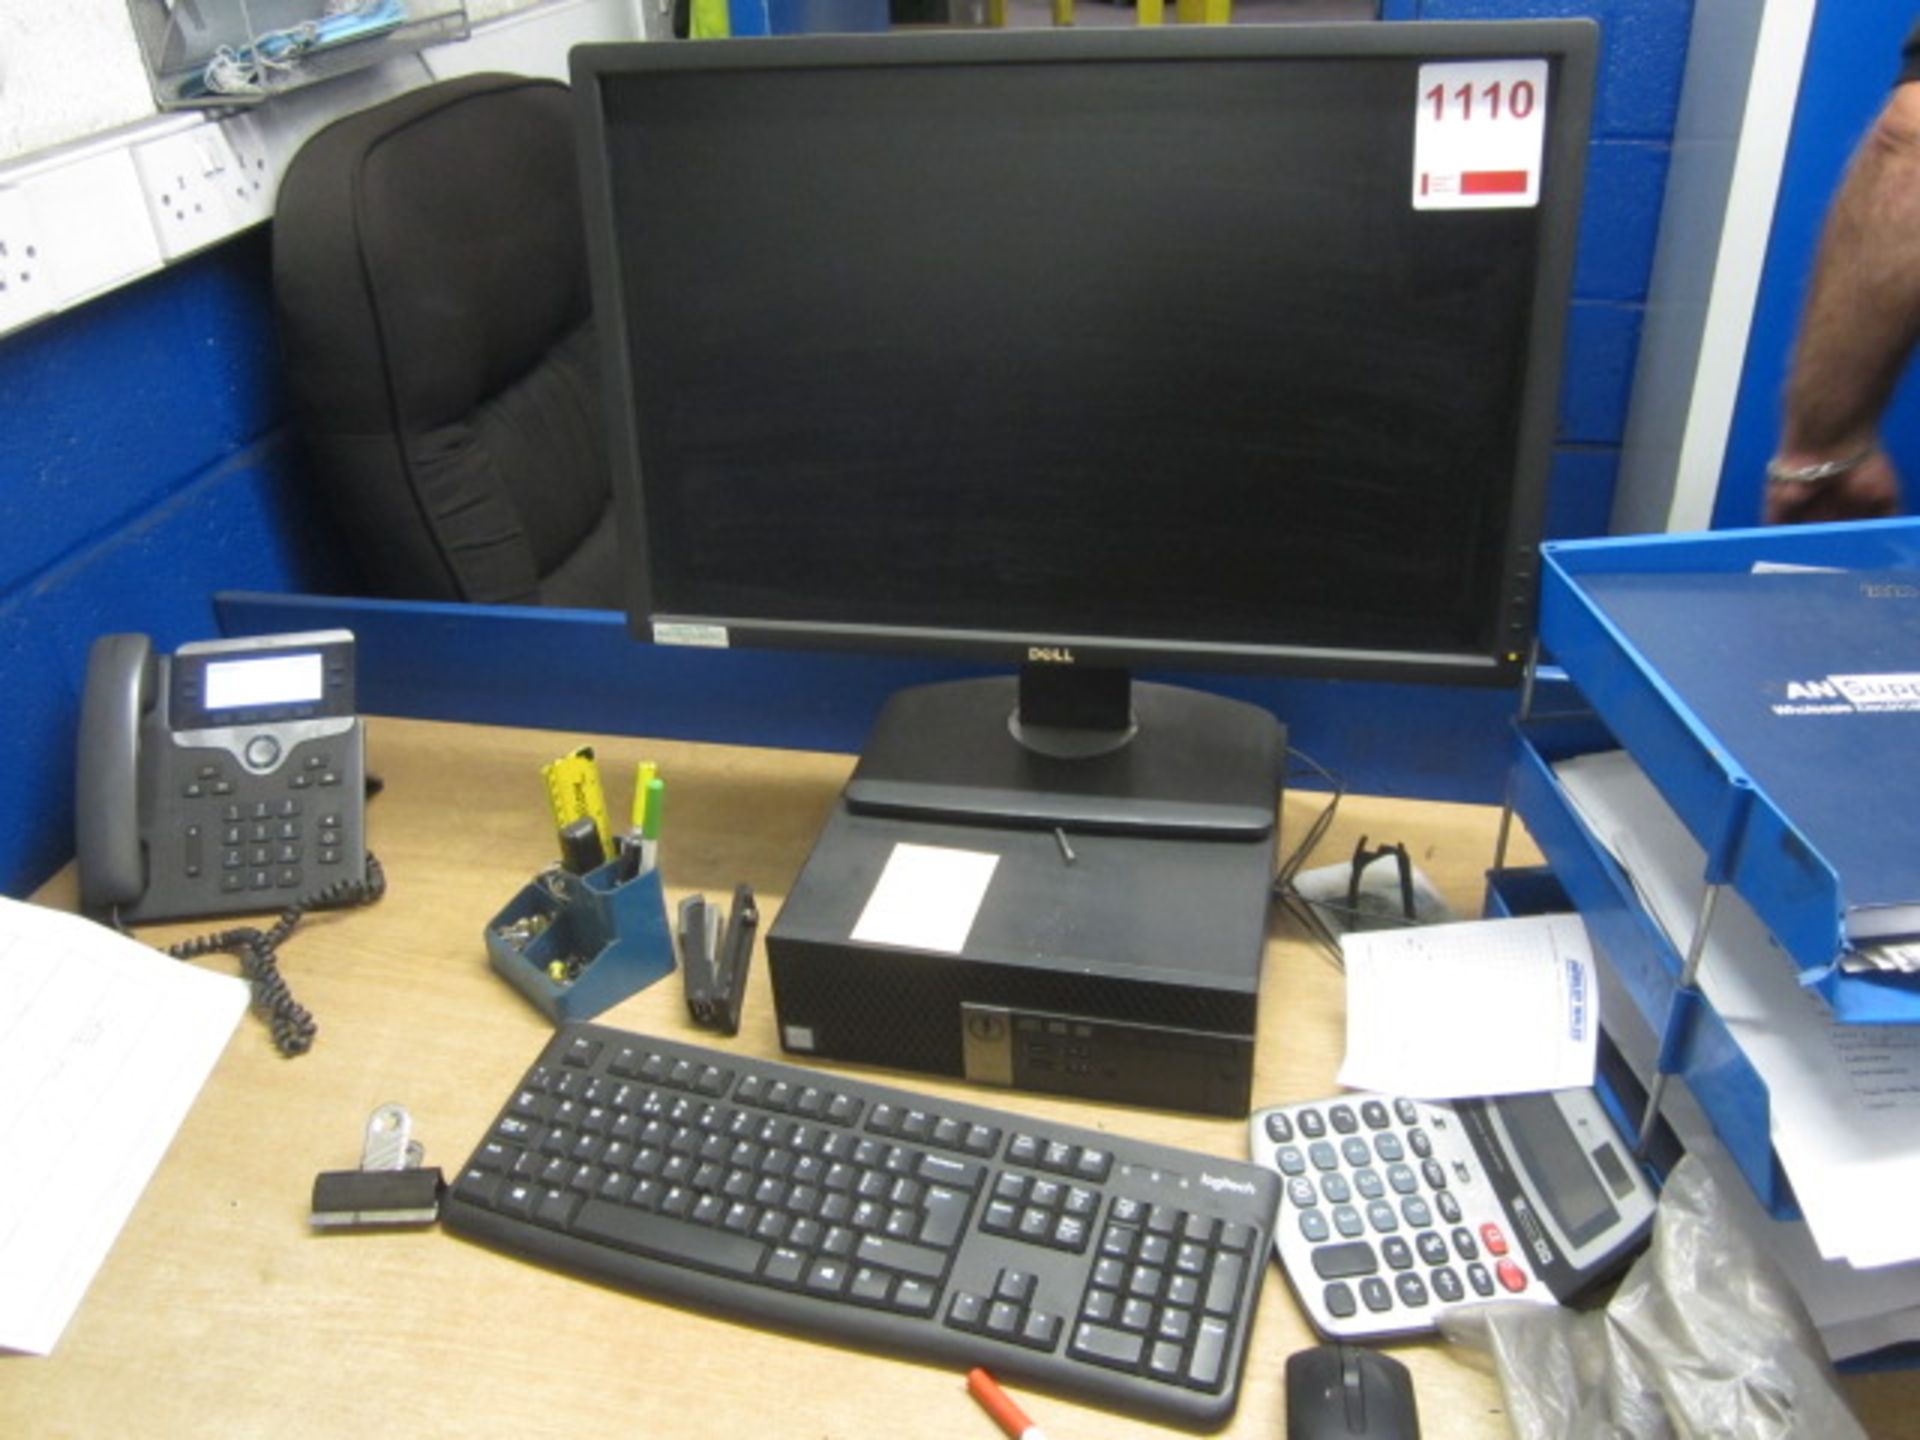 Dell Optiplex 7040 computer system, flat screen monitor, keyboard, mouse